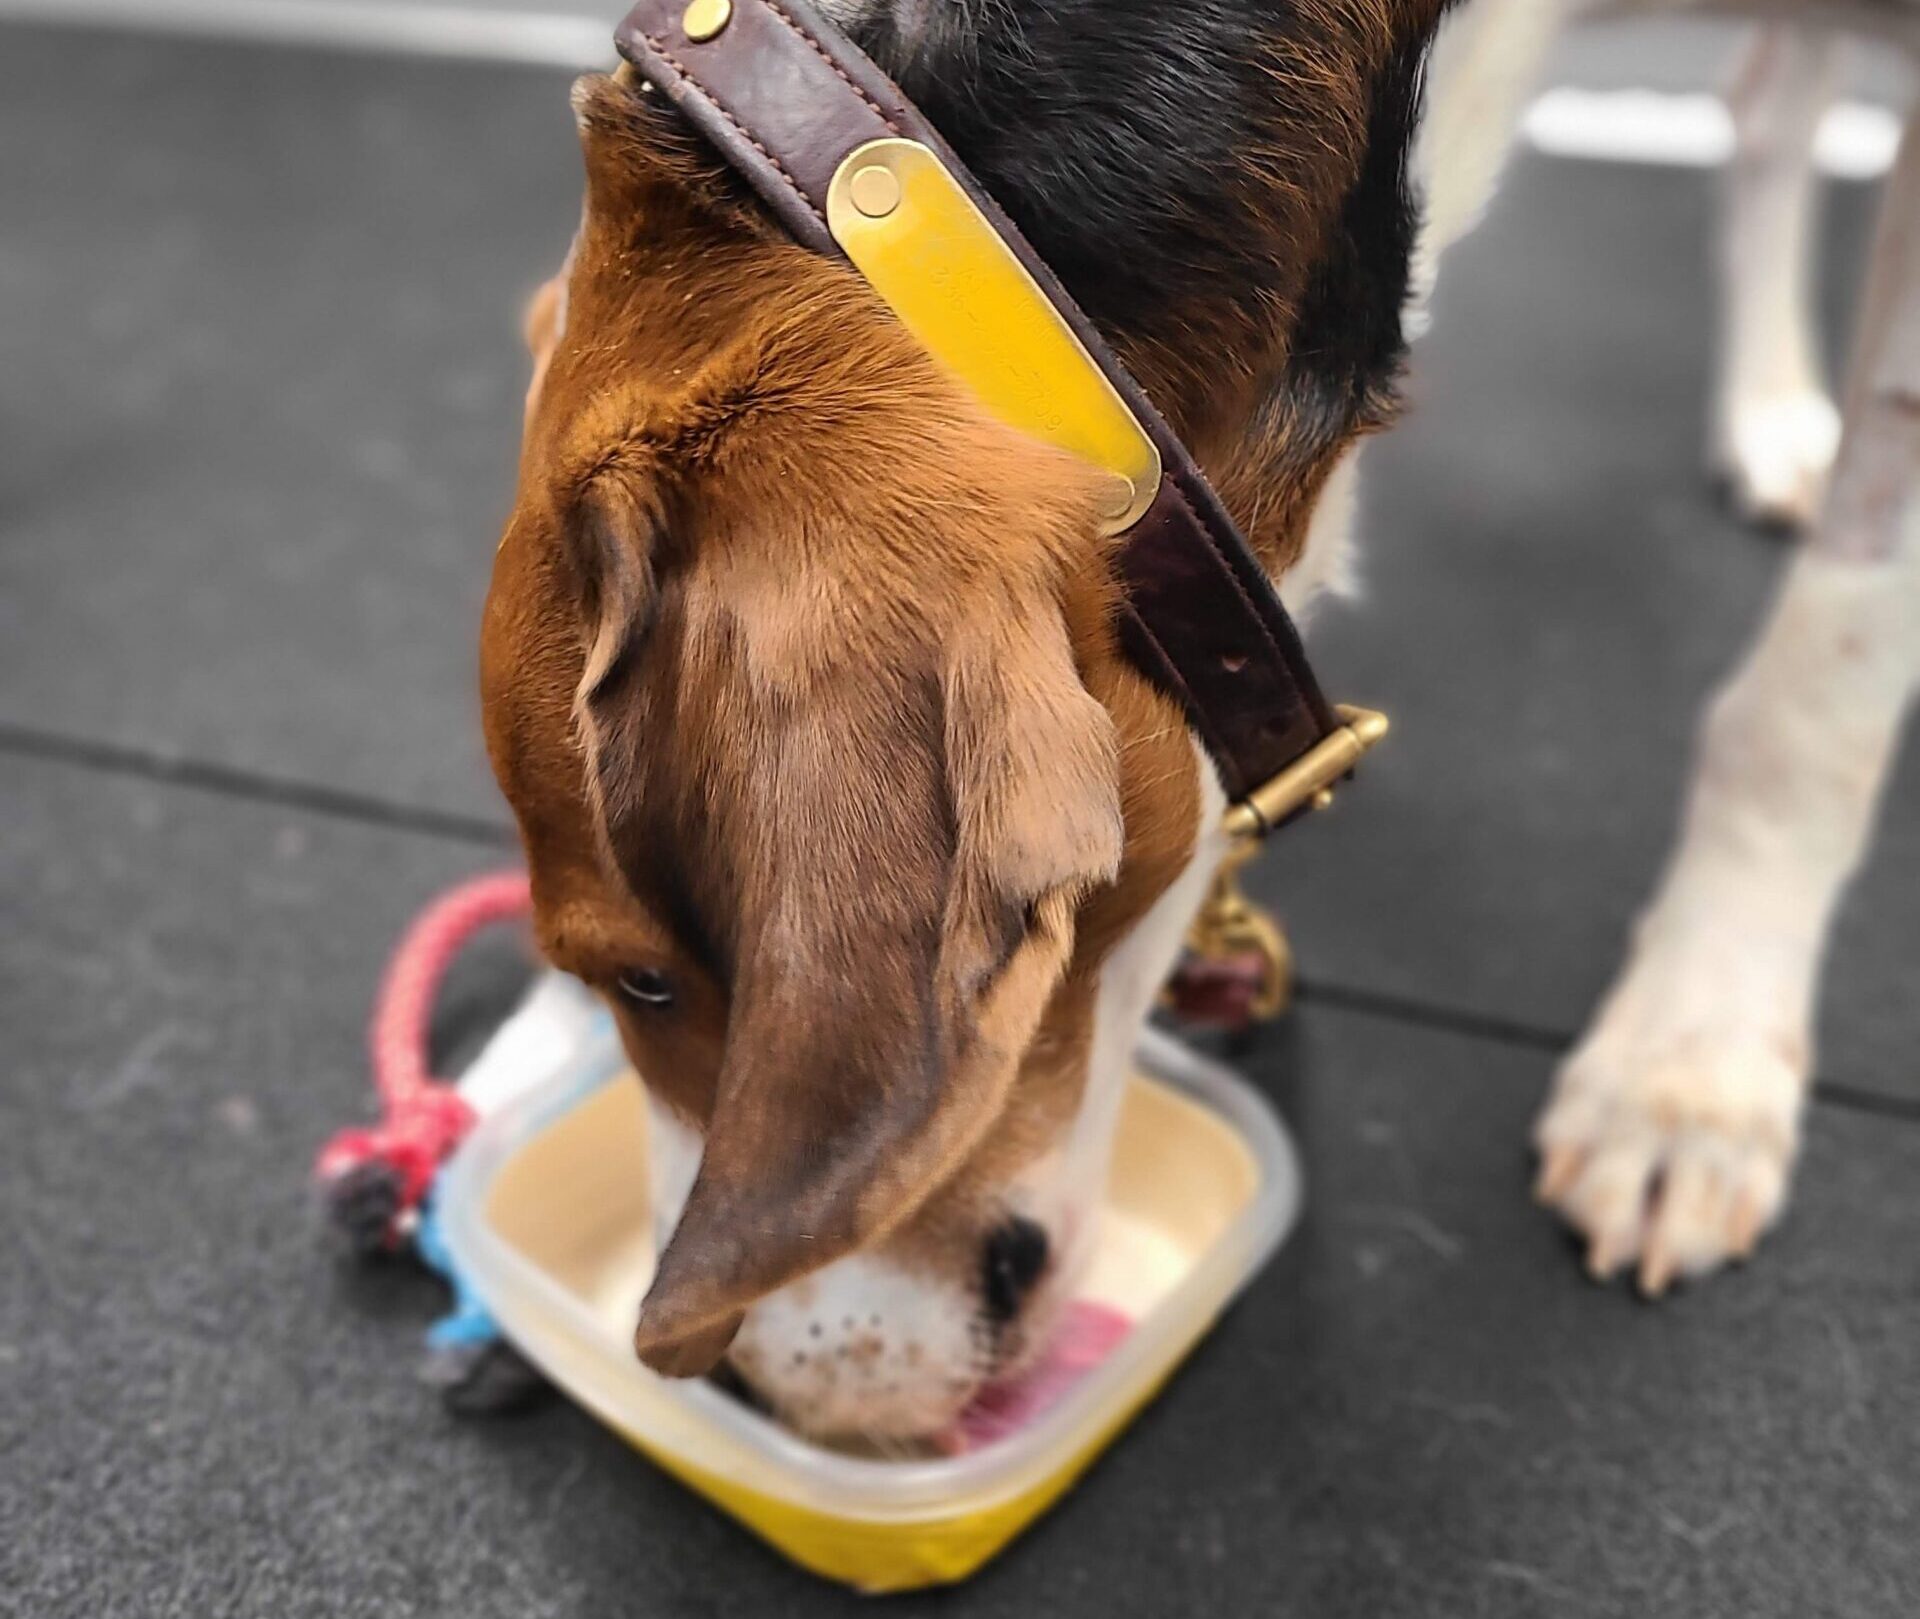 Brown and white hound licks a tupperware bowl in our cognitive lab.